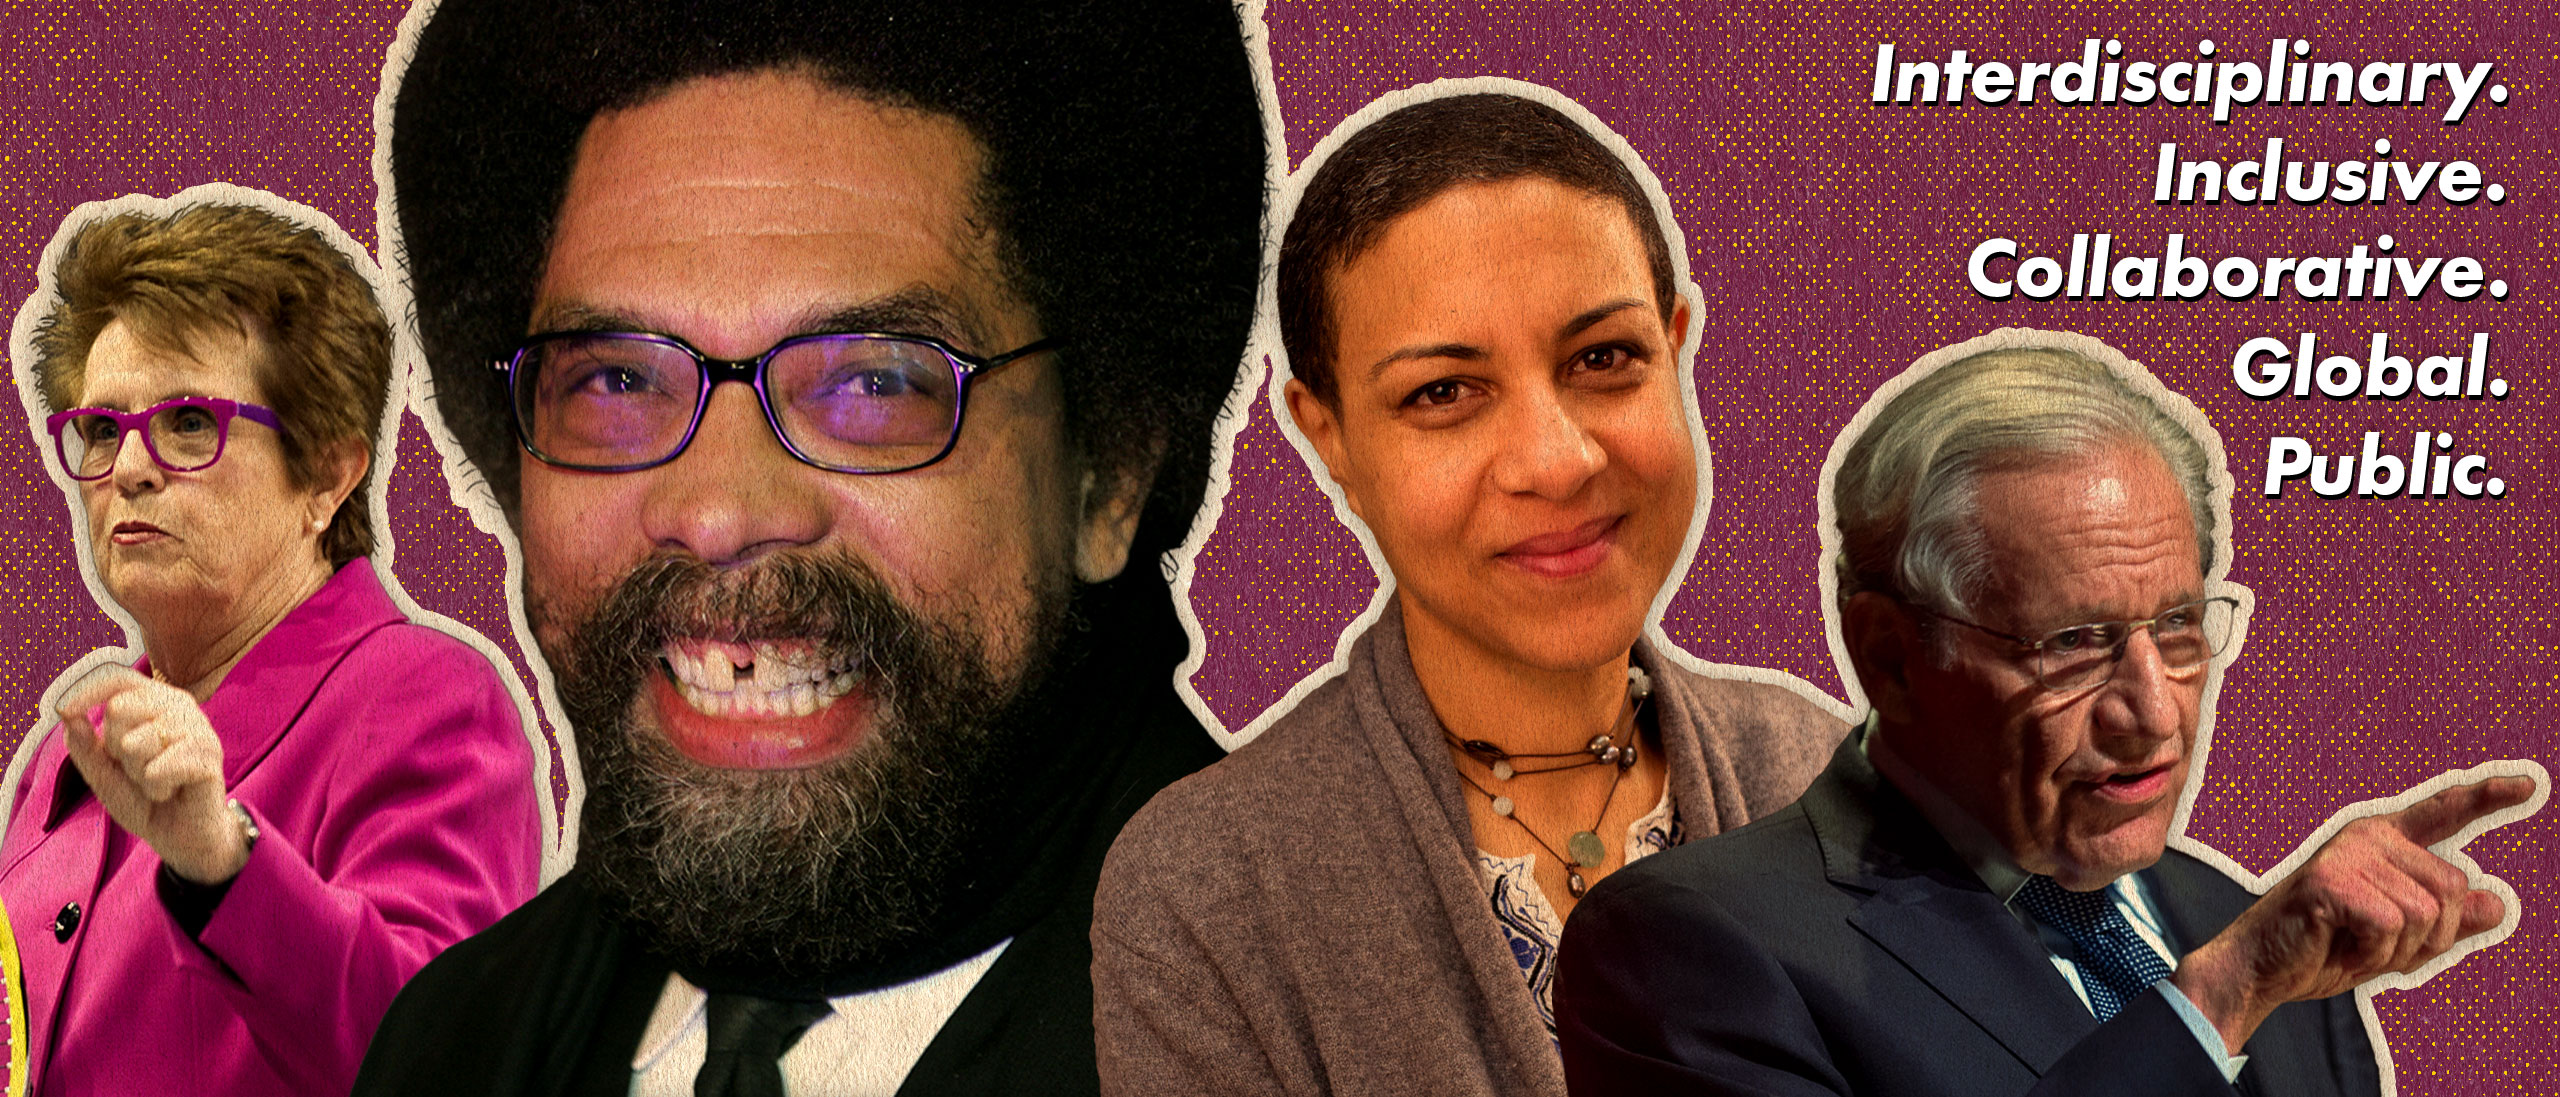 Billie Jean King, Cornell West, Elizabeth Pryor, and Bob Woodward. The words interdisciplinary, collaborative, inclusive, global, and public are superimposed.